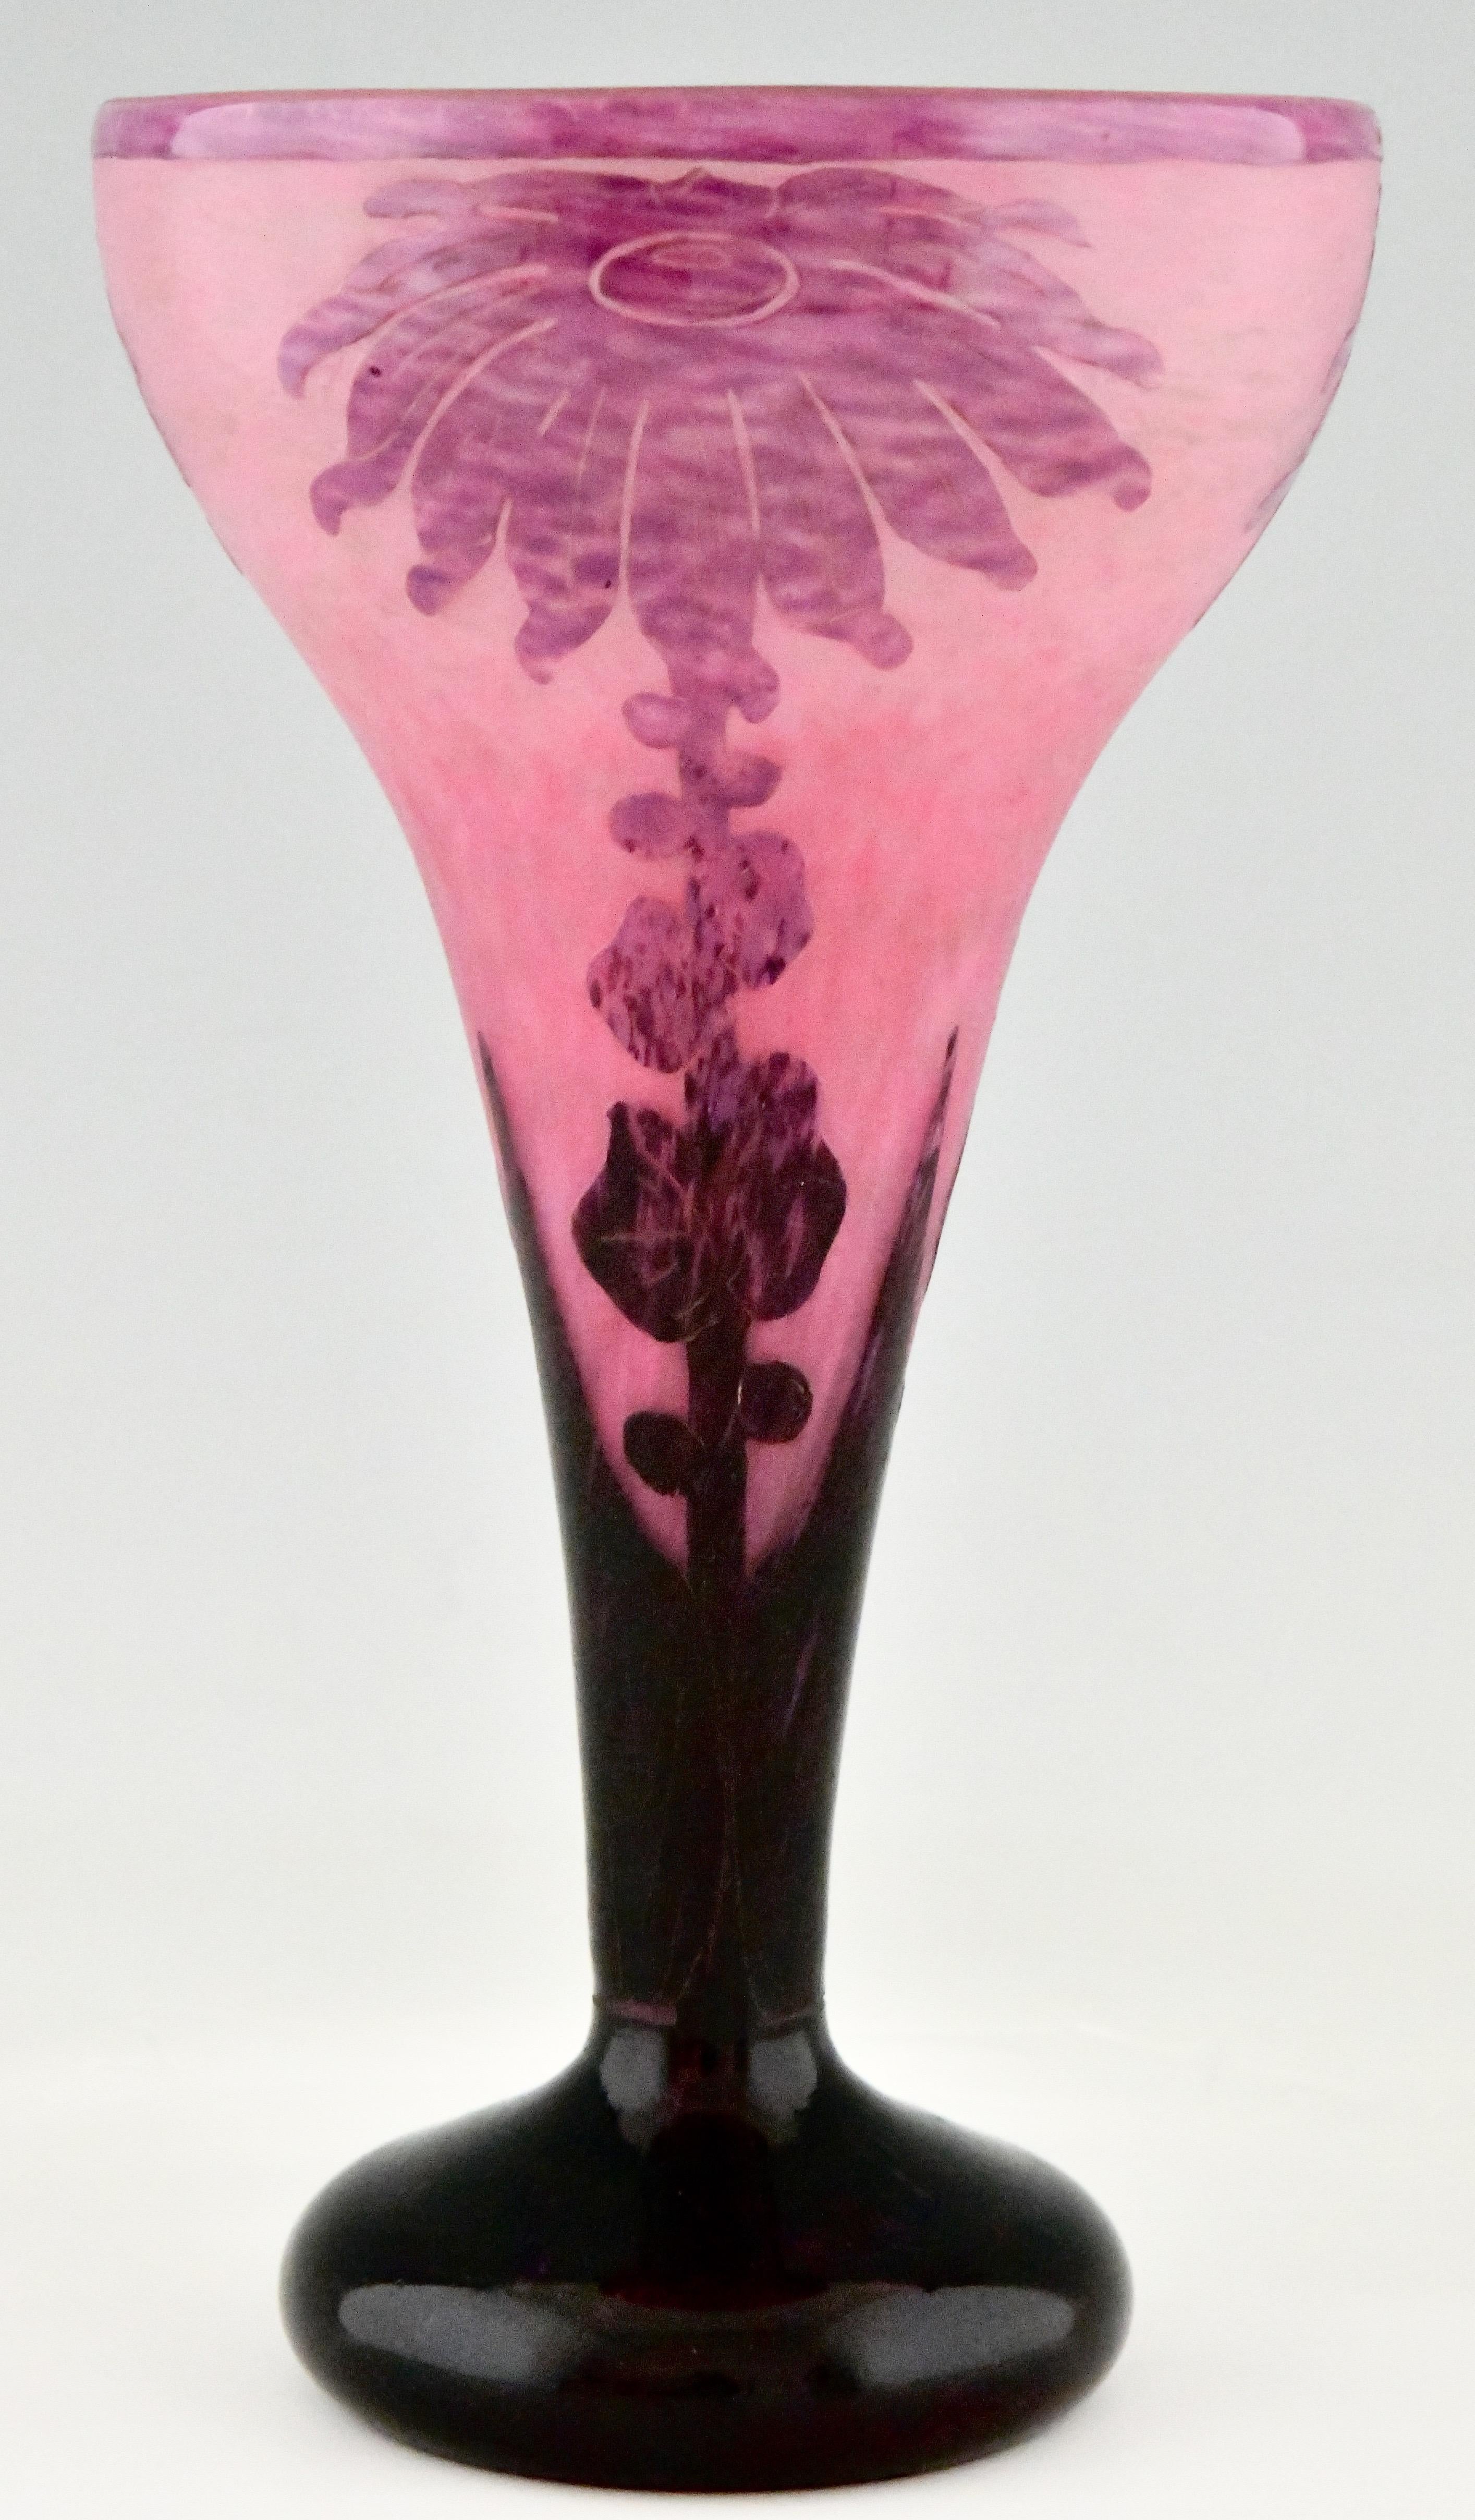 Dahlias, tall Art Deco cameo glass vase with flowers by Charles, Schneider for Le Verre Français Pink and purple cameo glass. France Ca. 1923-1926.

This decor is illustrated in Charles Schneider - Le Verre Français - Charder - Schneider by